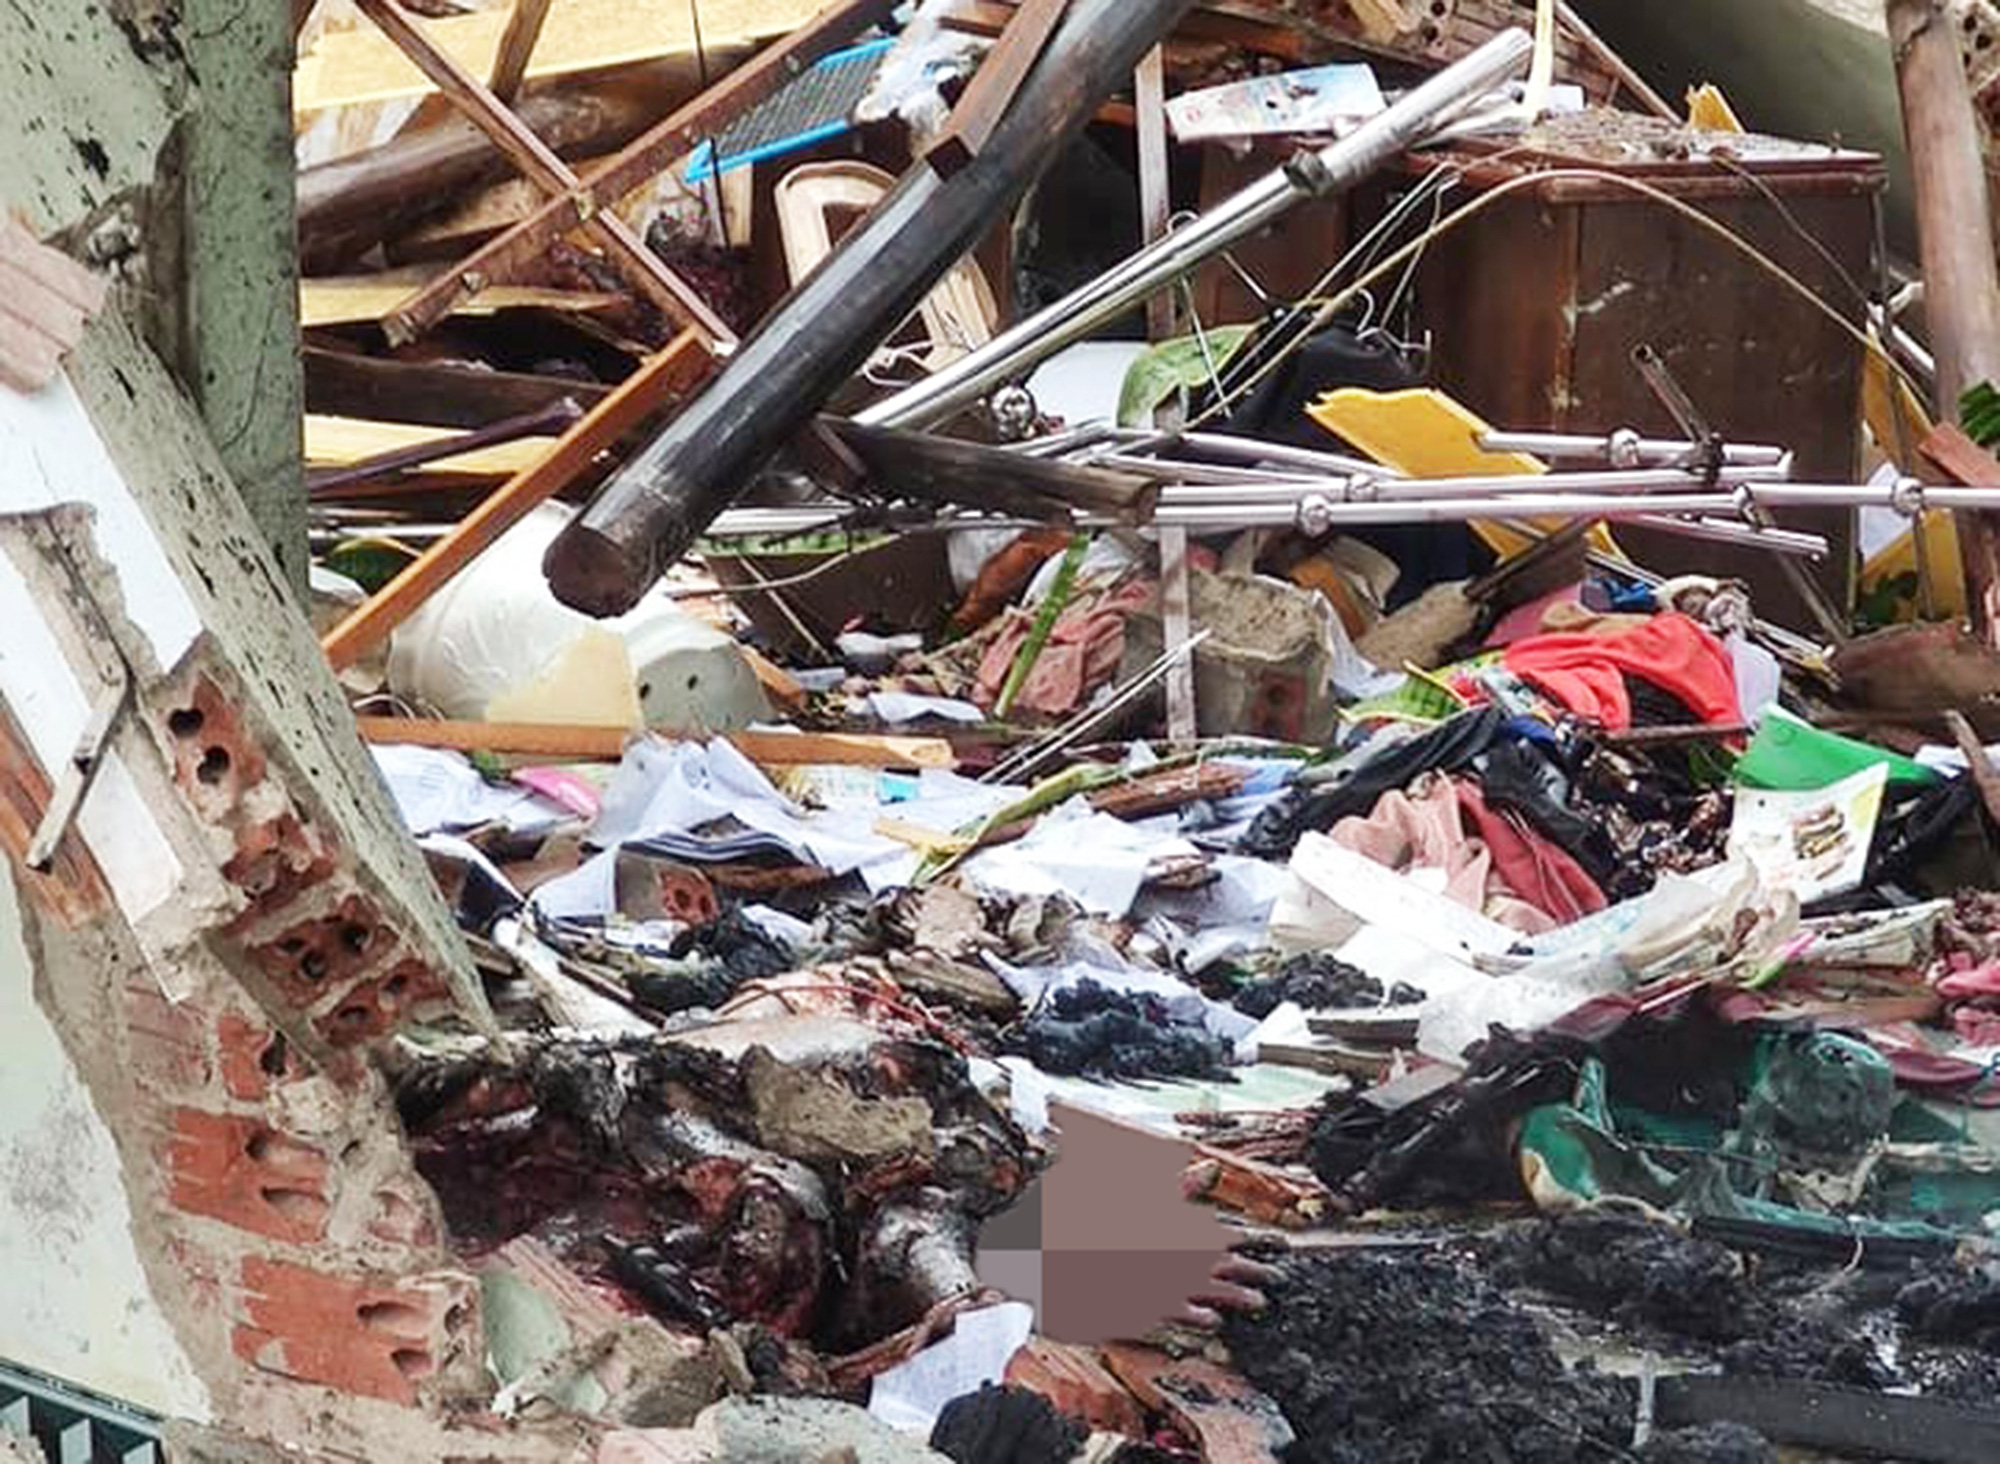 Married couple killed in house explosion in central Vietnam